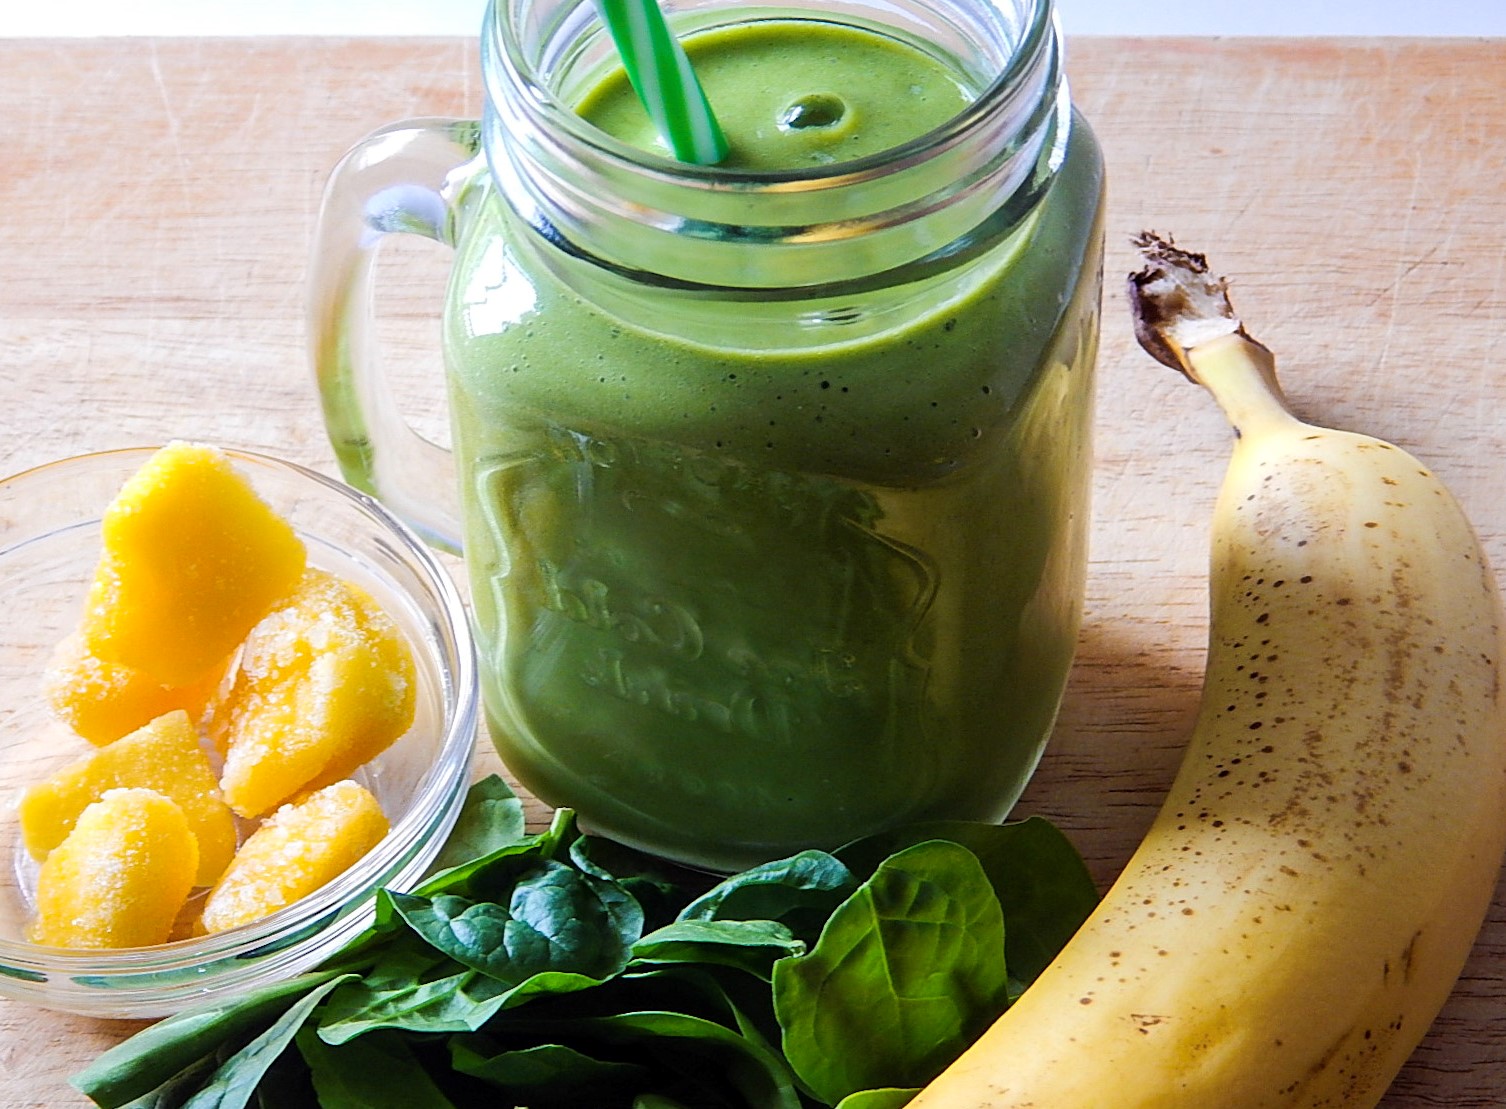 My Easy & Healthy Go-To Breakfast Smoothie Recipe